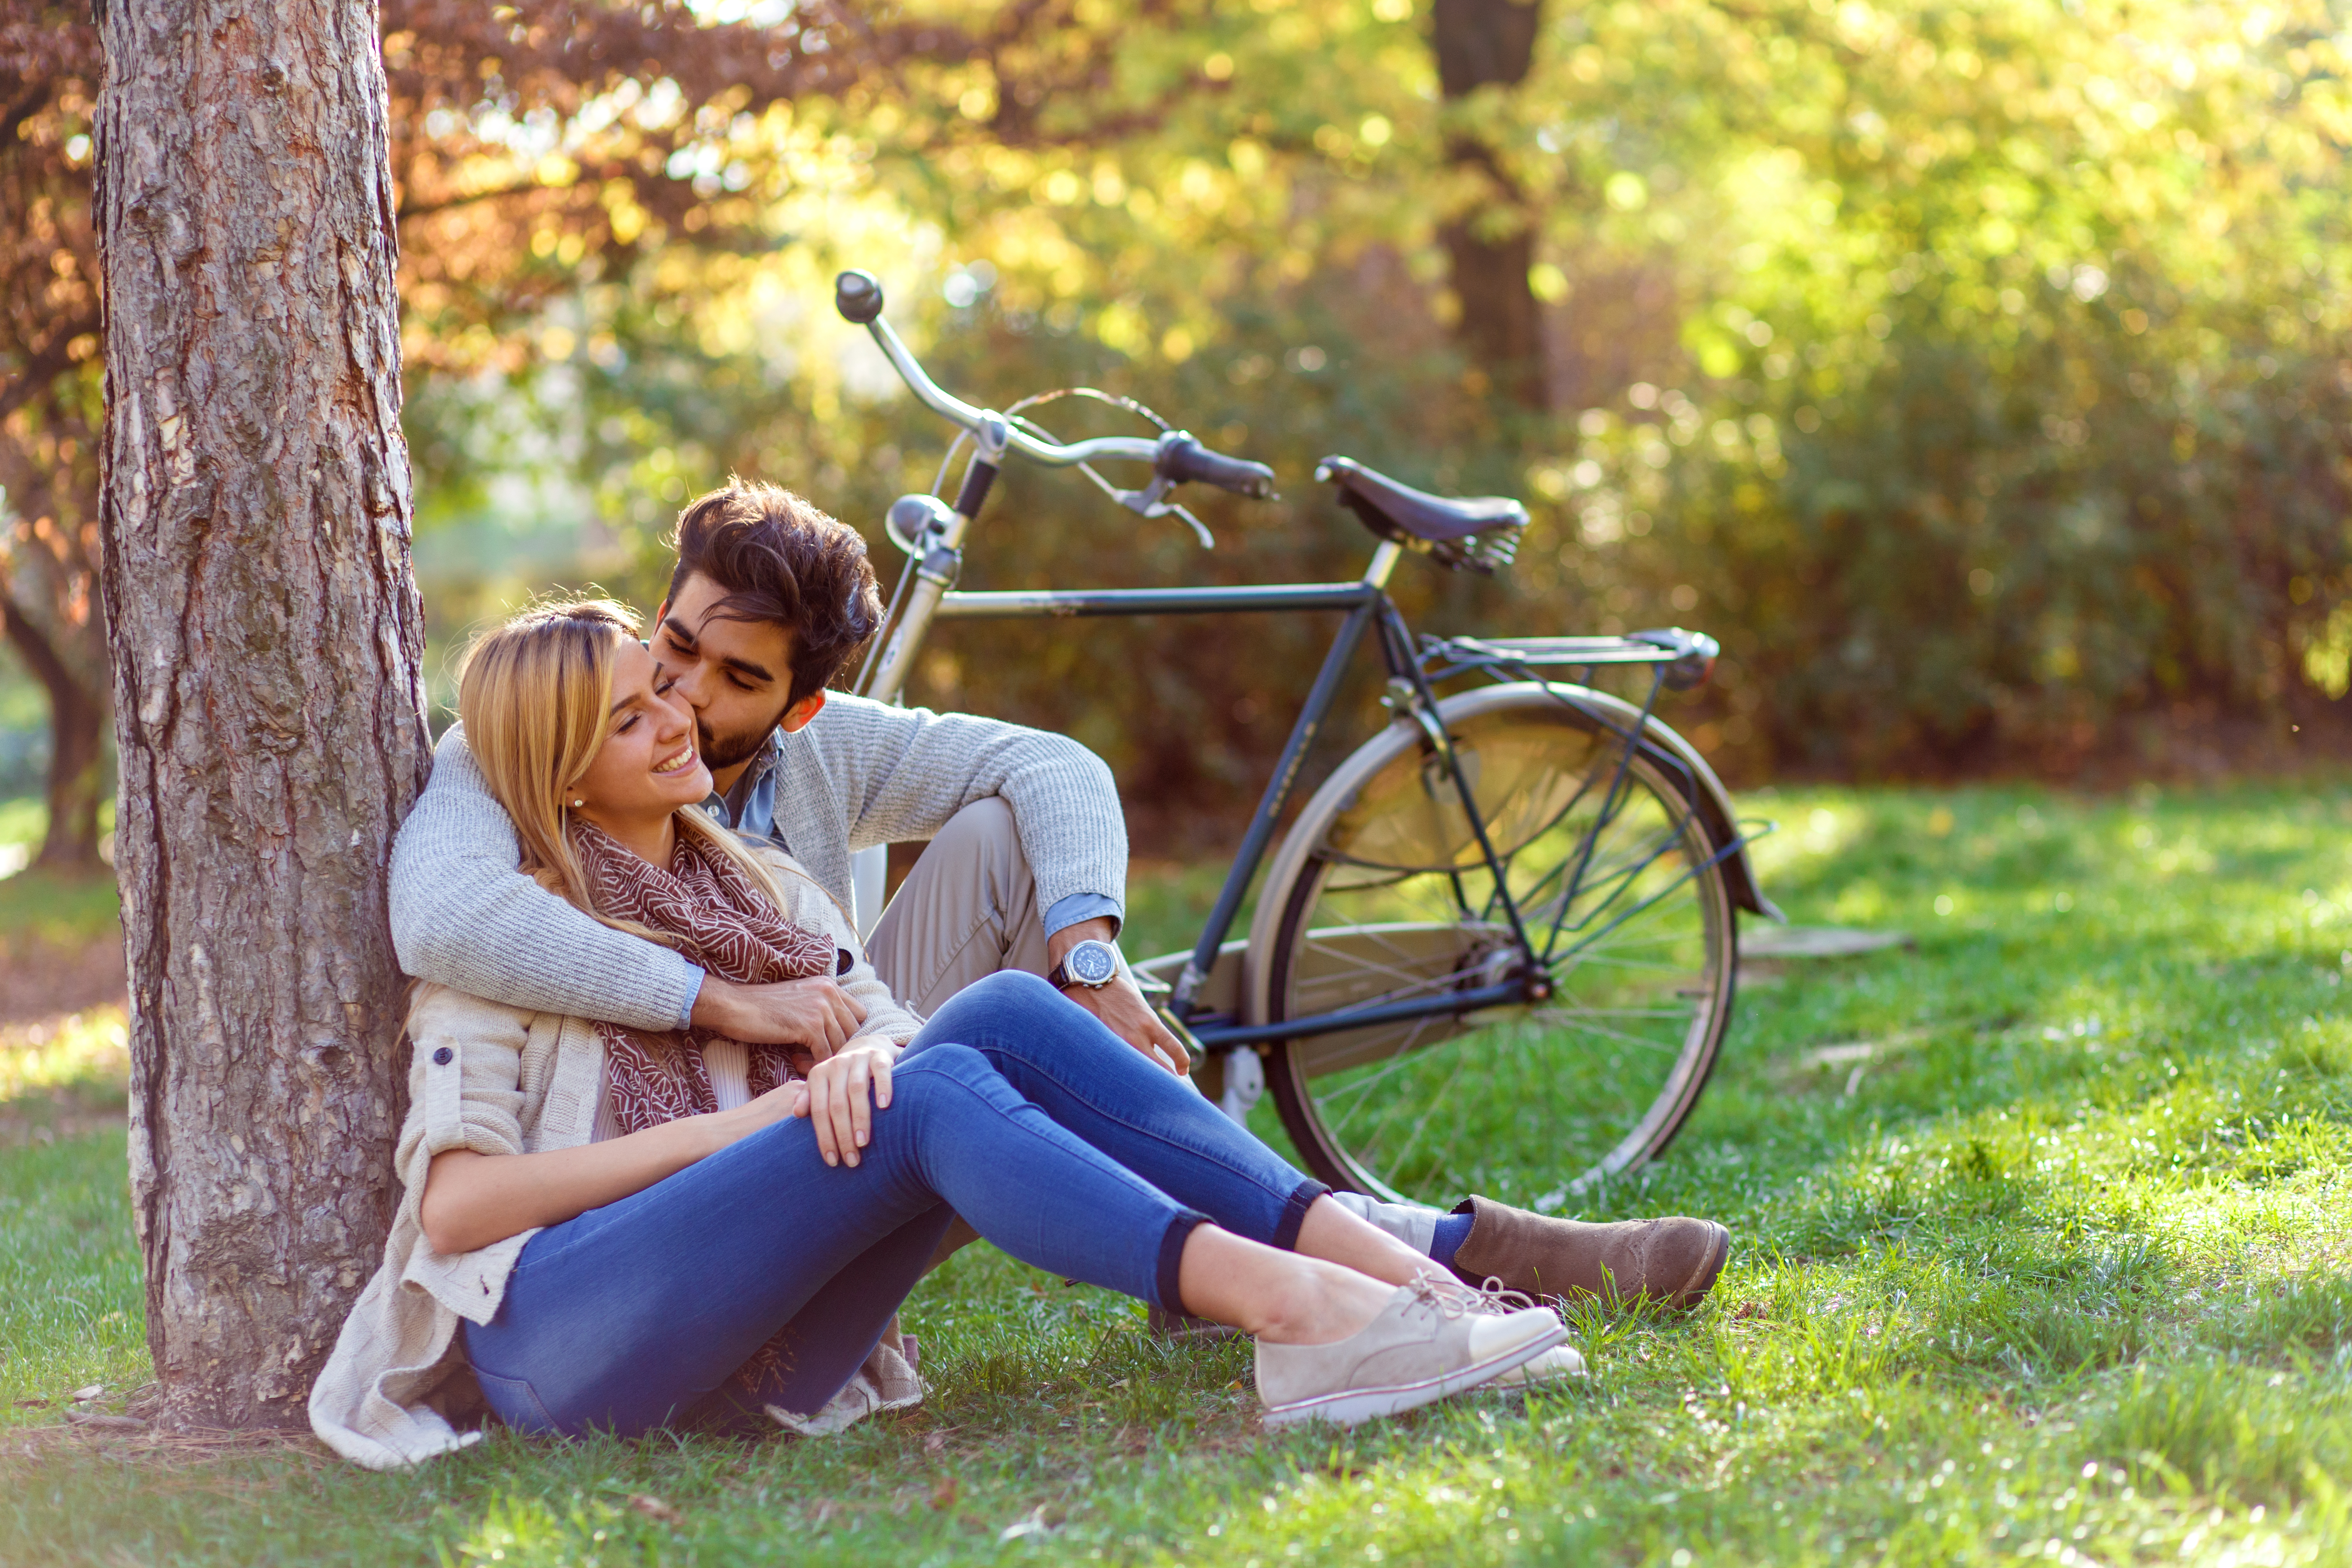 A couple is pictured having a wonderful time in a park | Source: Shutterstock